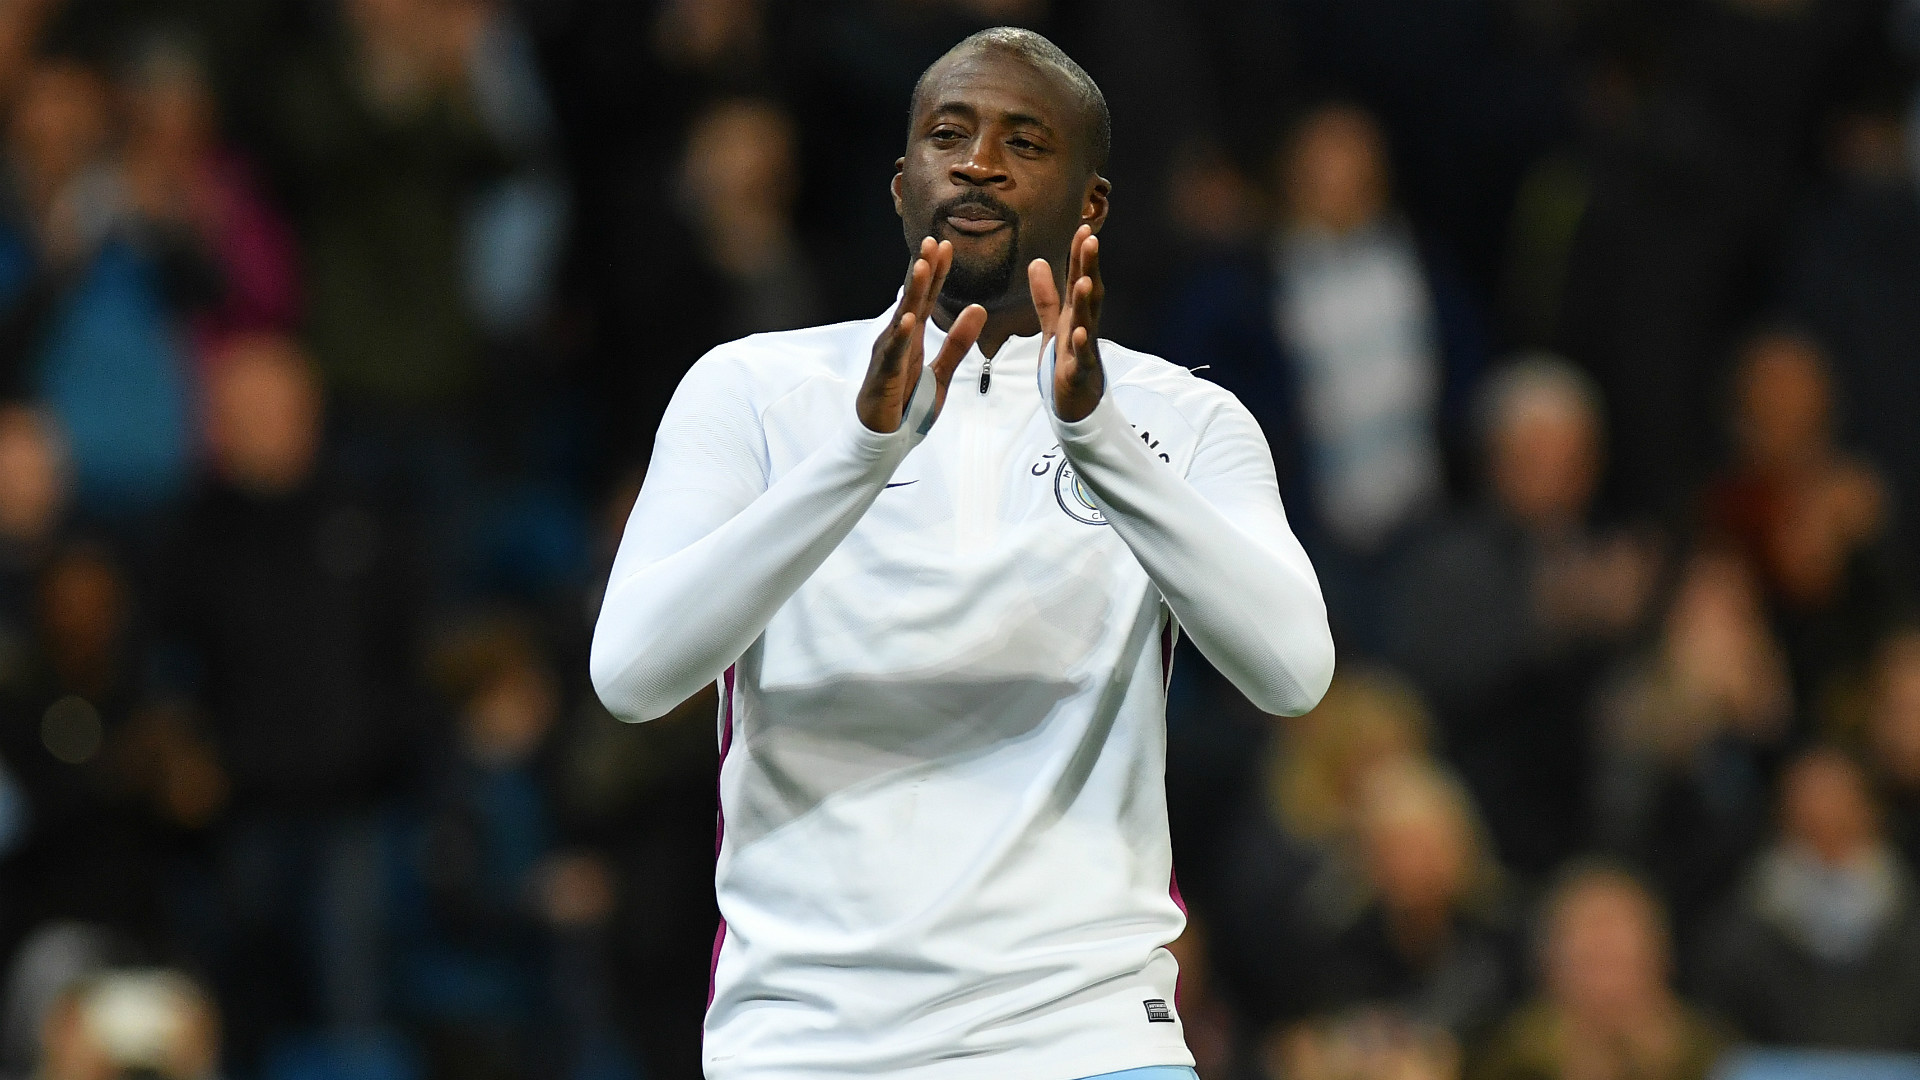 Yaya Touré has passed a medical in London, says agent